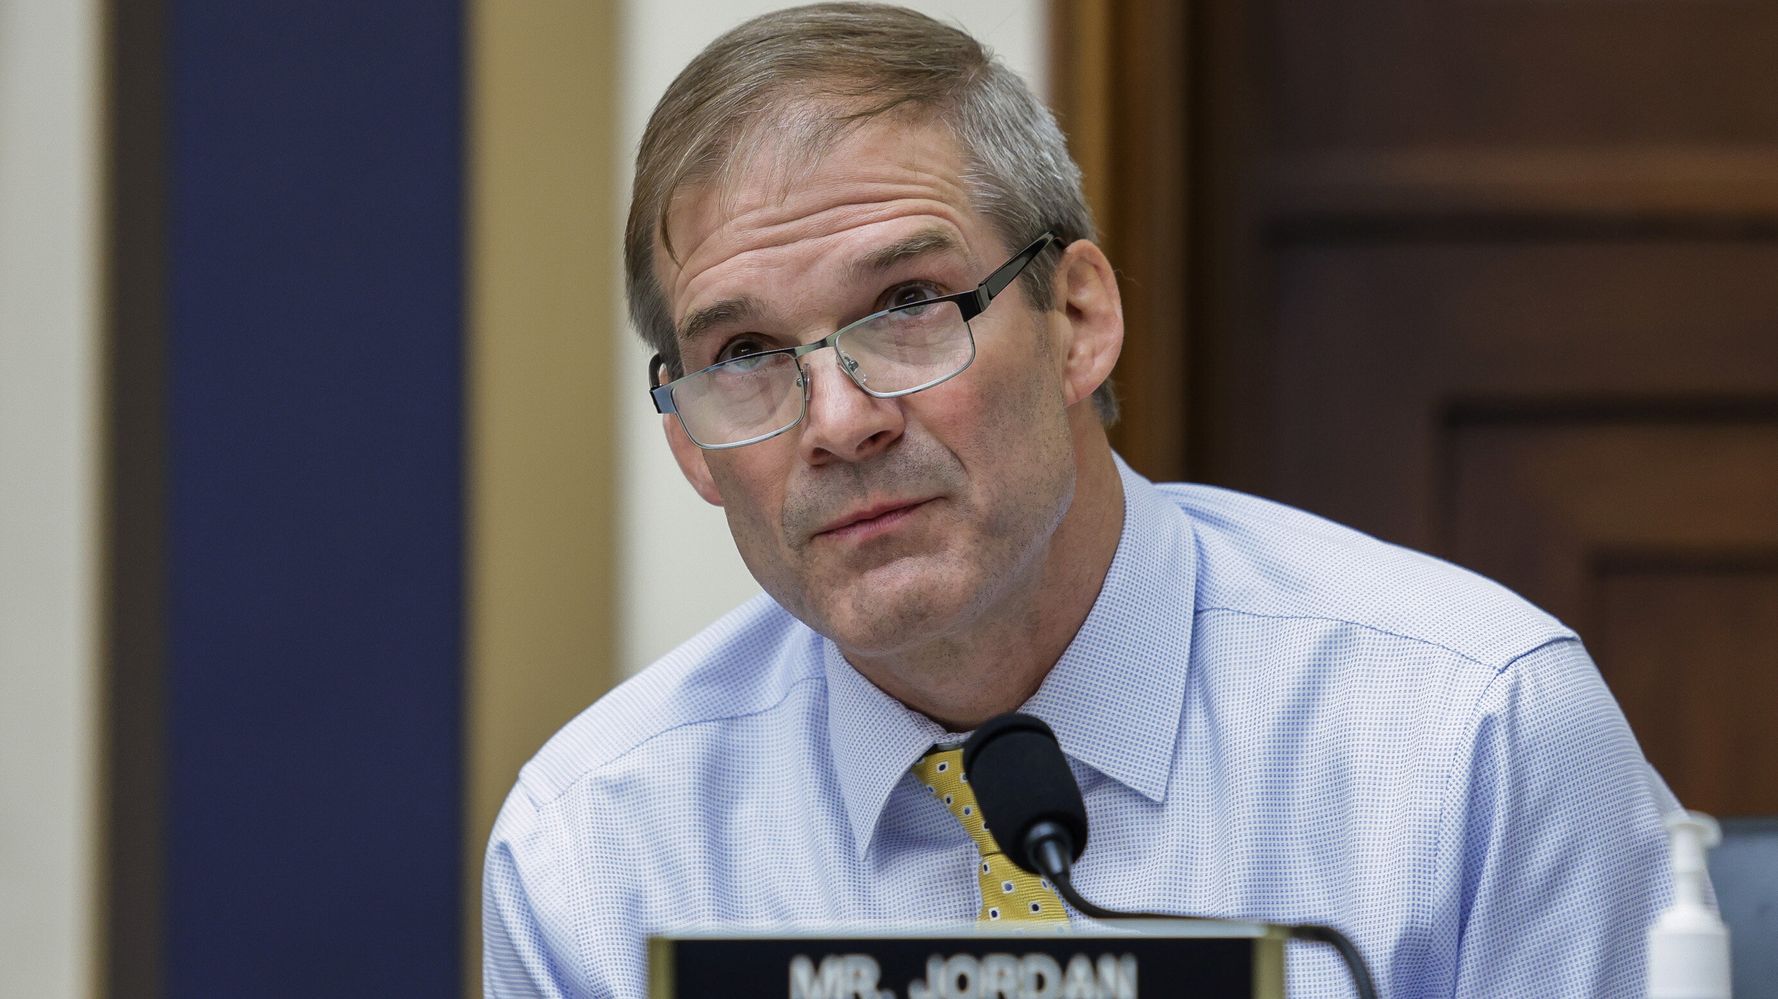 Jim Jordan Schooled On History After Invoking Founders To Swipe At ...